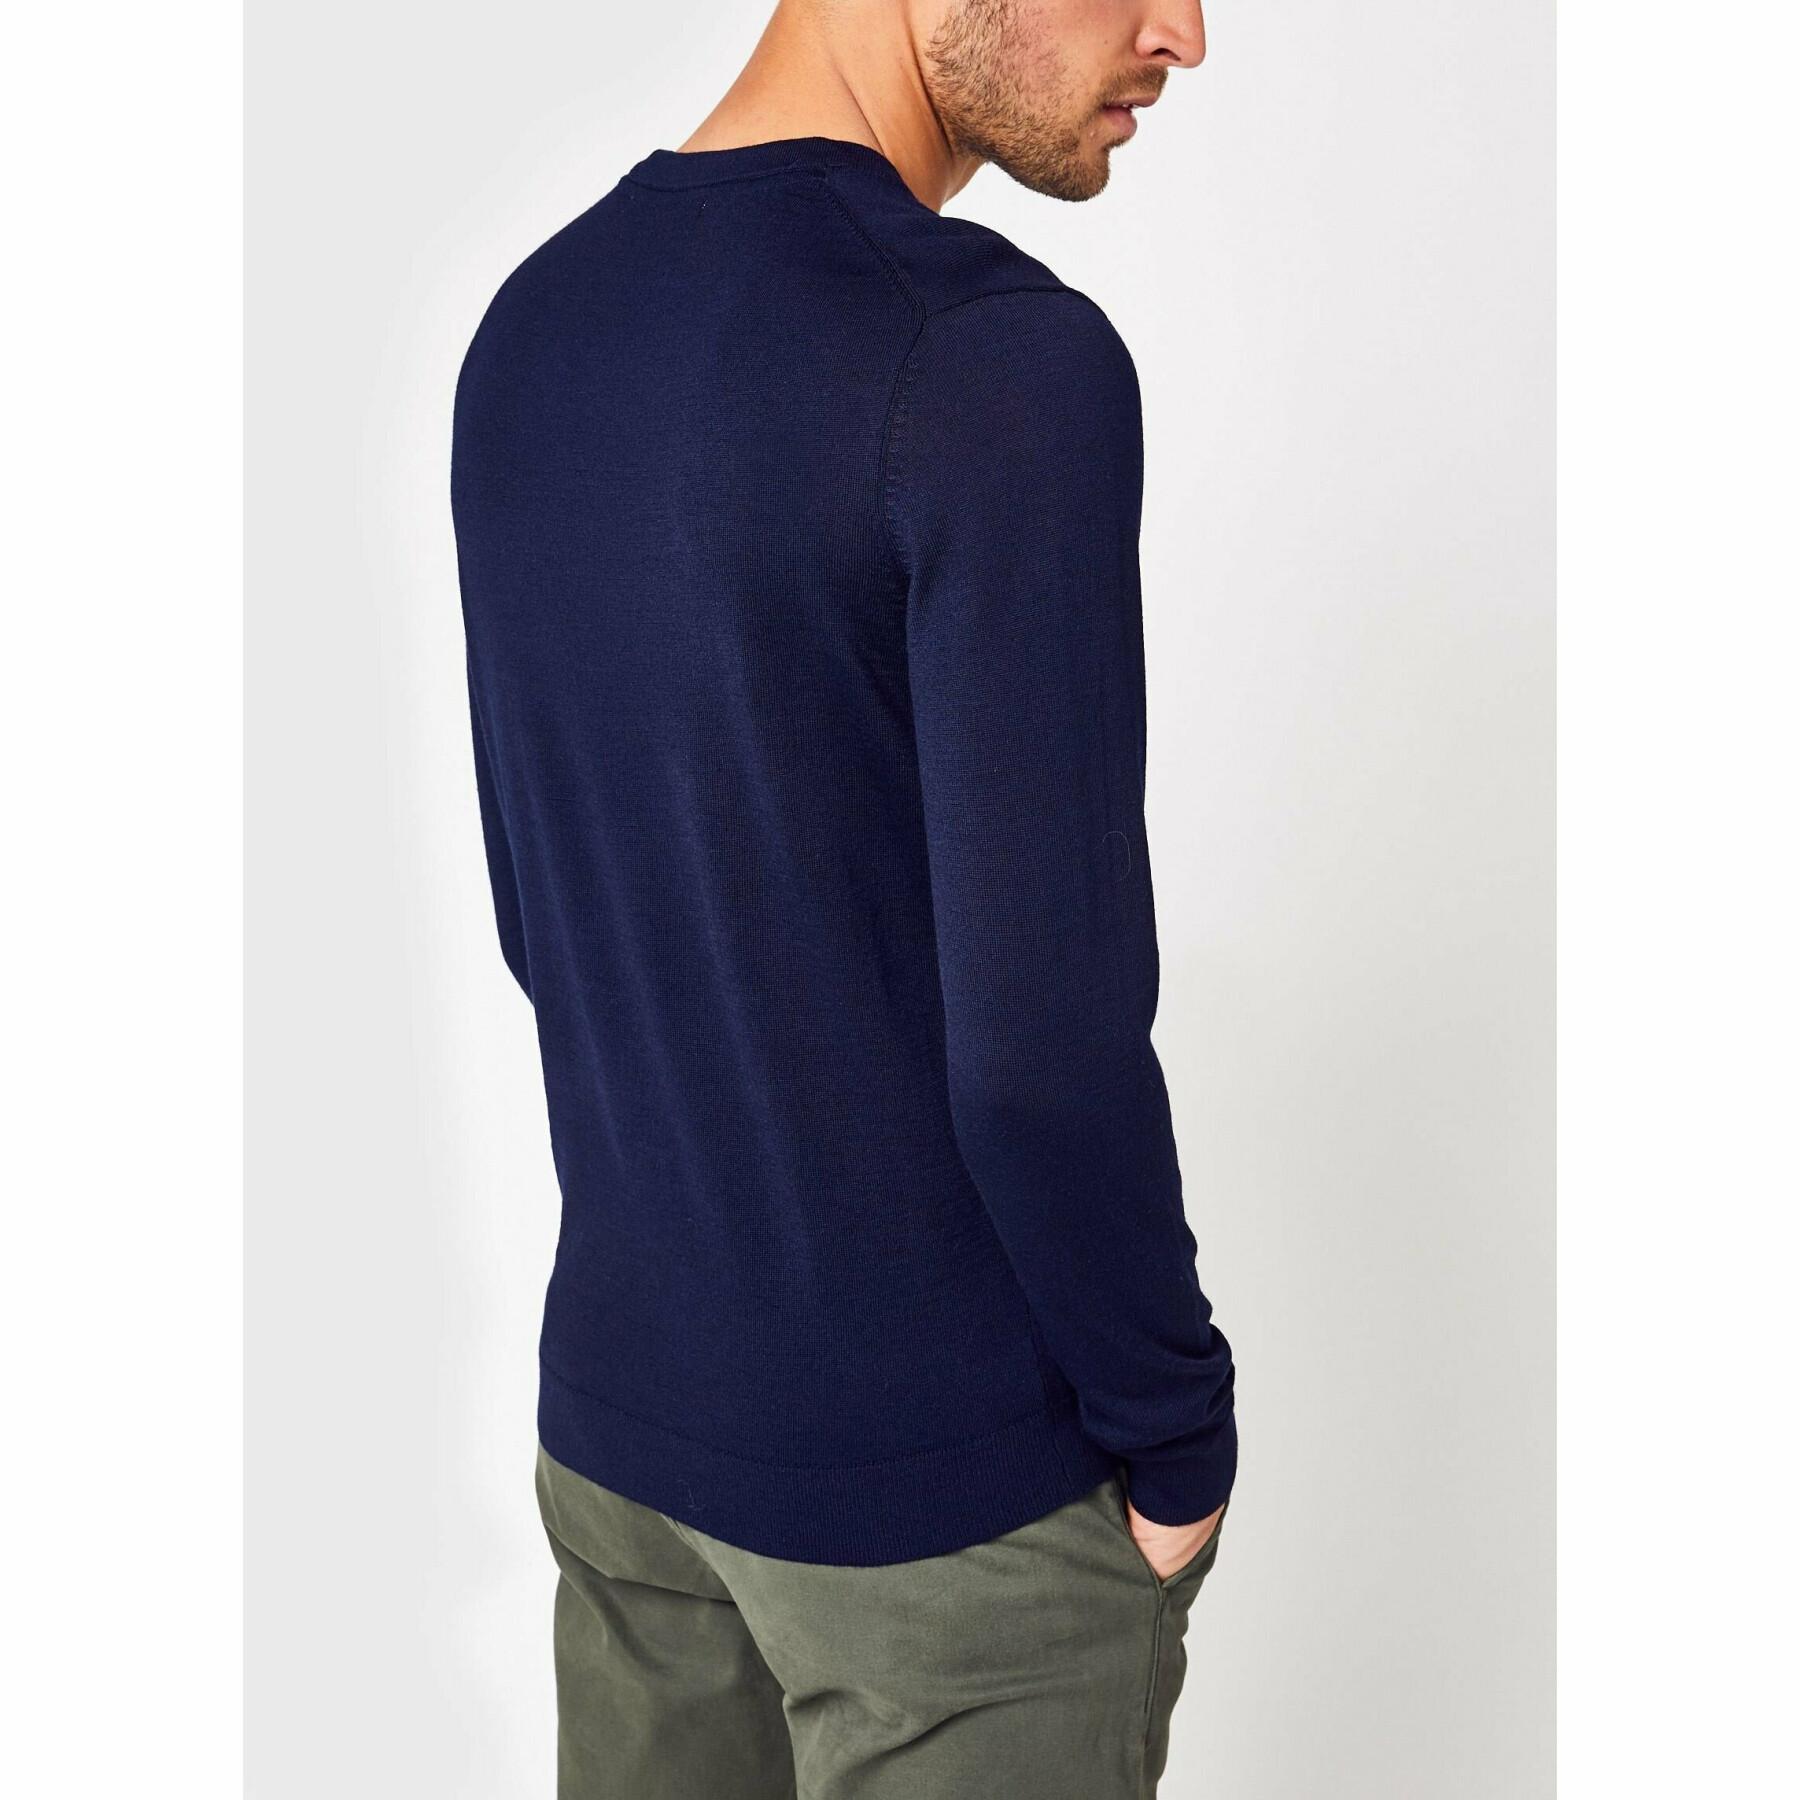 Pullover Selected Town merino coolmax knit col rond